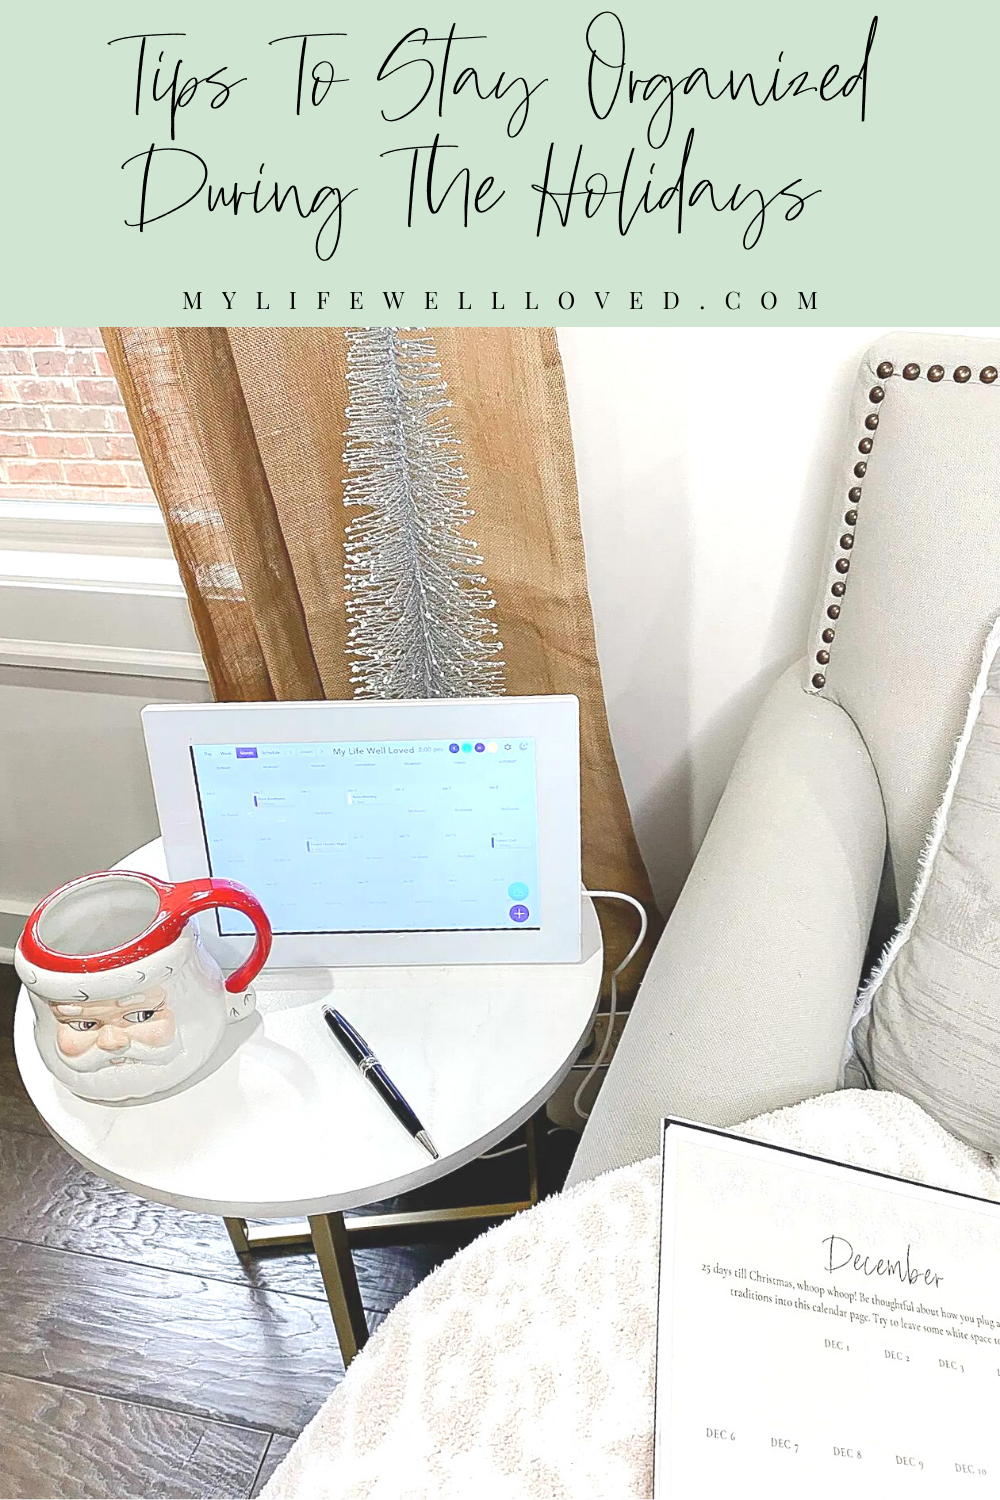 How To Stay Organized During The Holidays With Skylight Calendar by Alabama family + lifestyle blogger, Heather Brown // My Life Well Loved